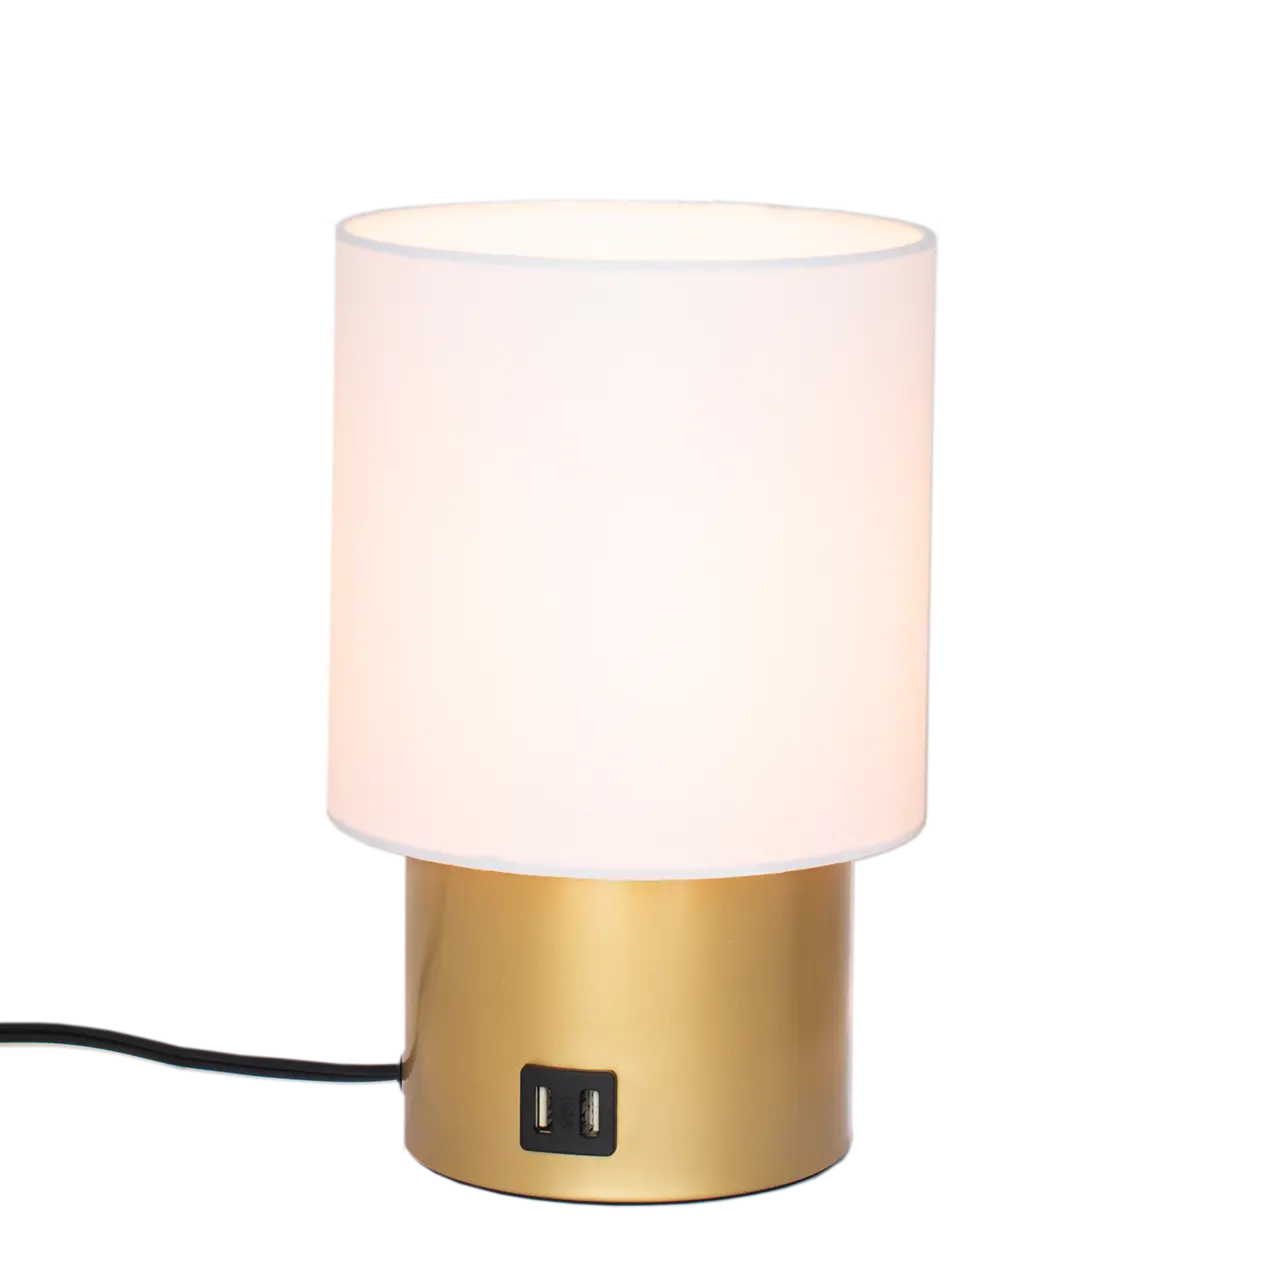 Modern Luxury Hotel Bedside Lamp Indoor Decor Metal Table Lamp With Round Fabric Shade